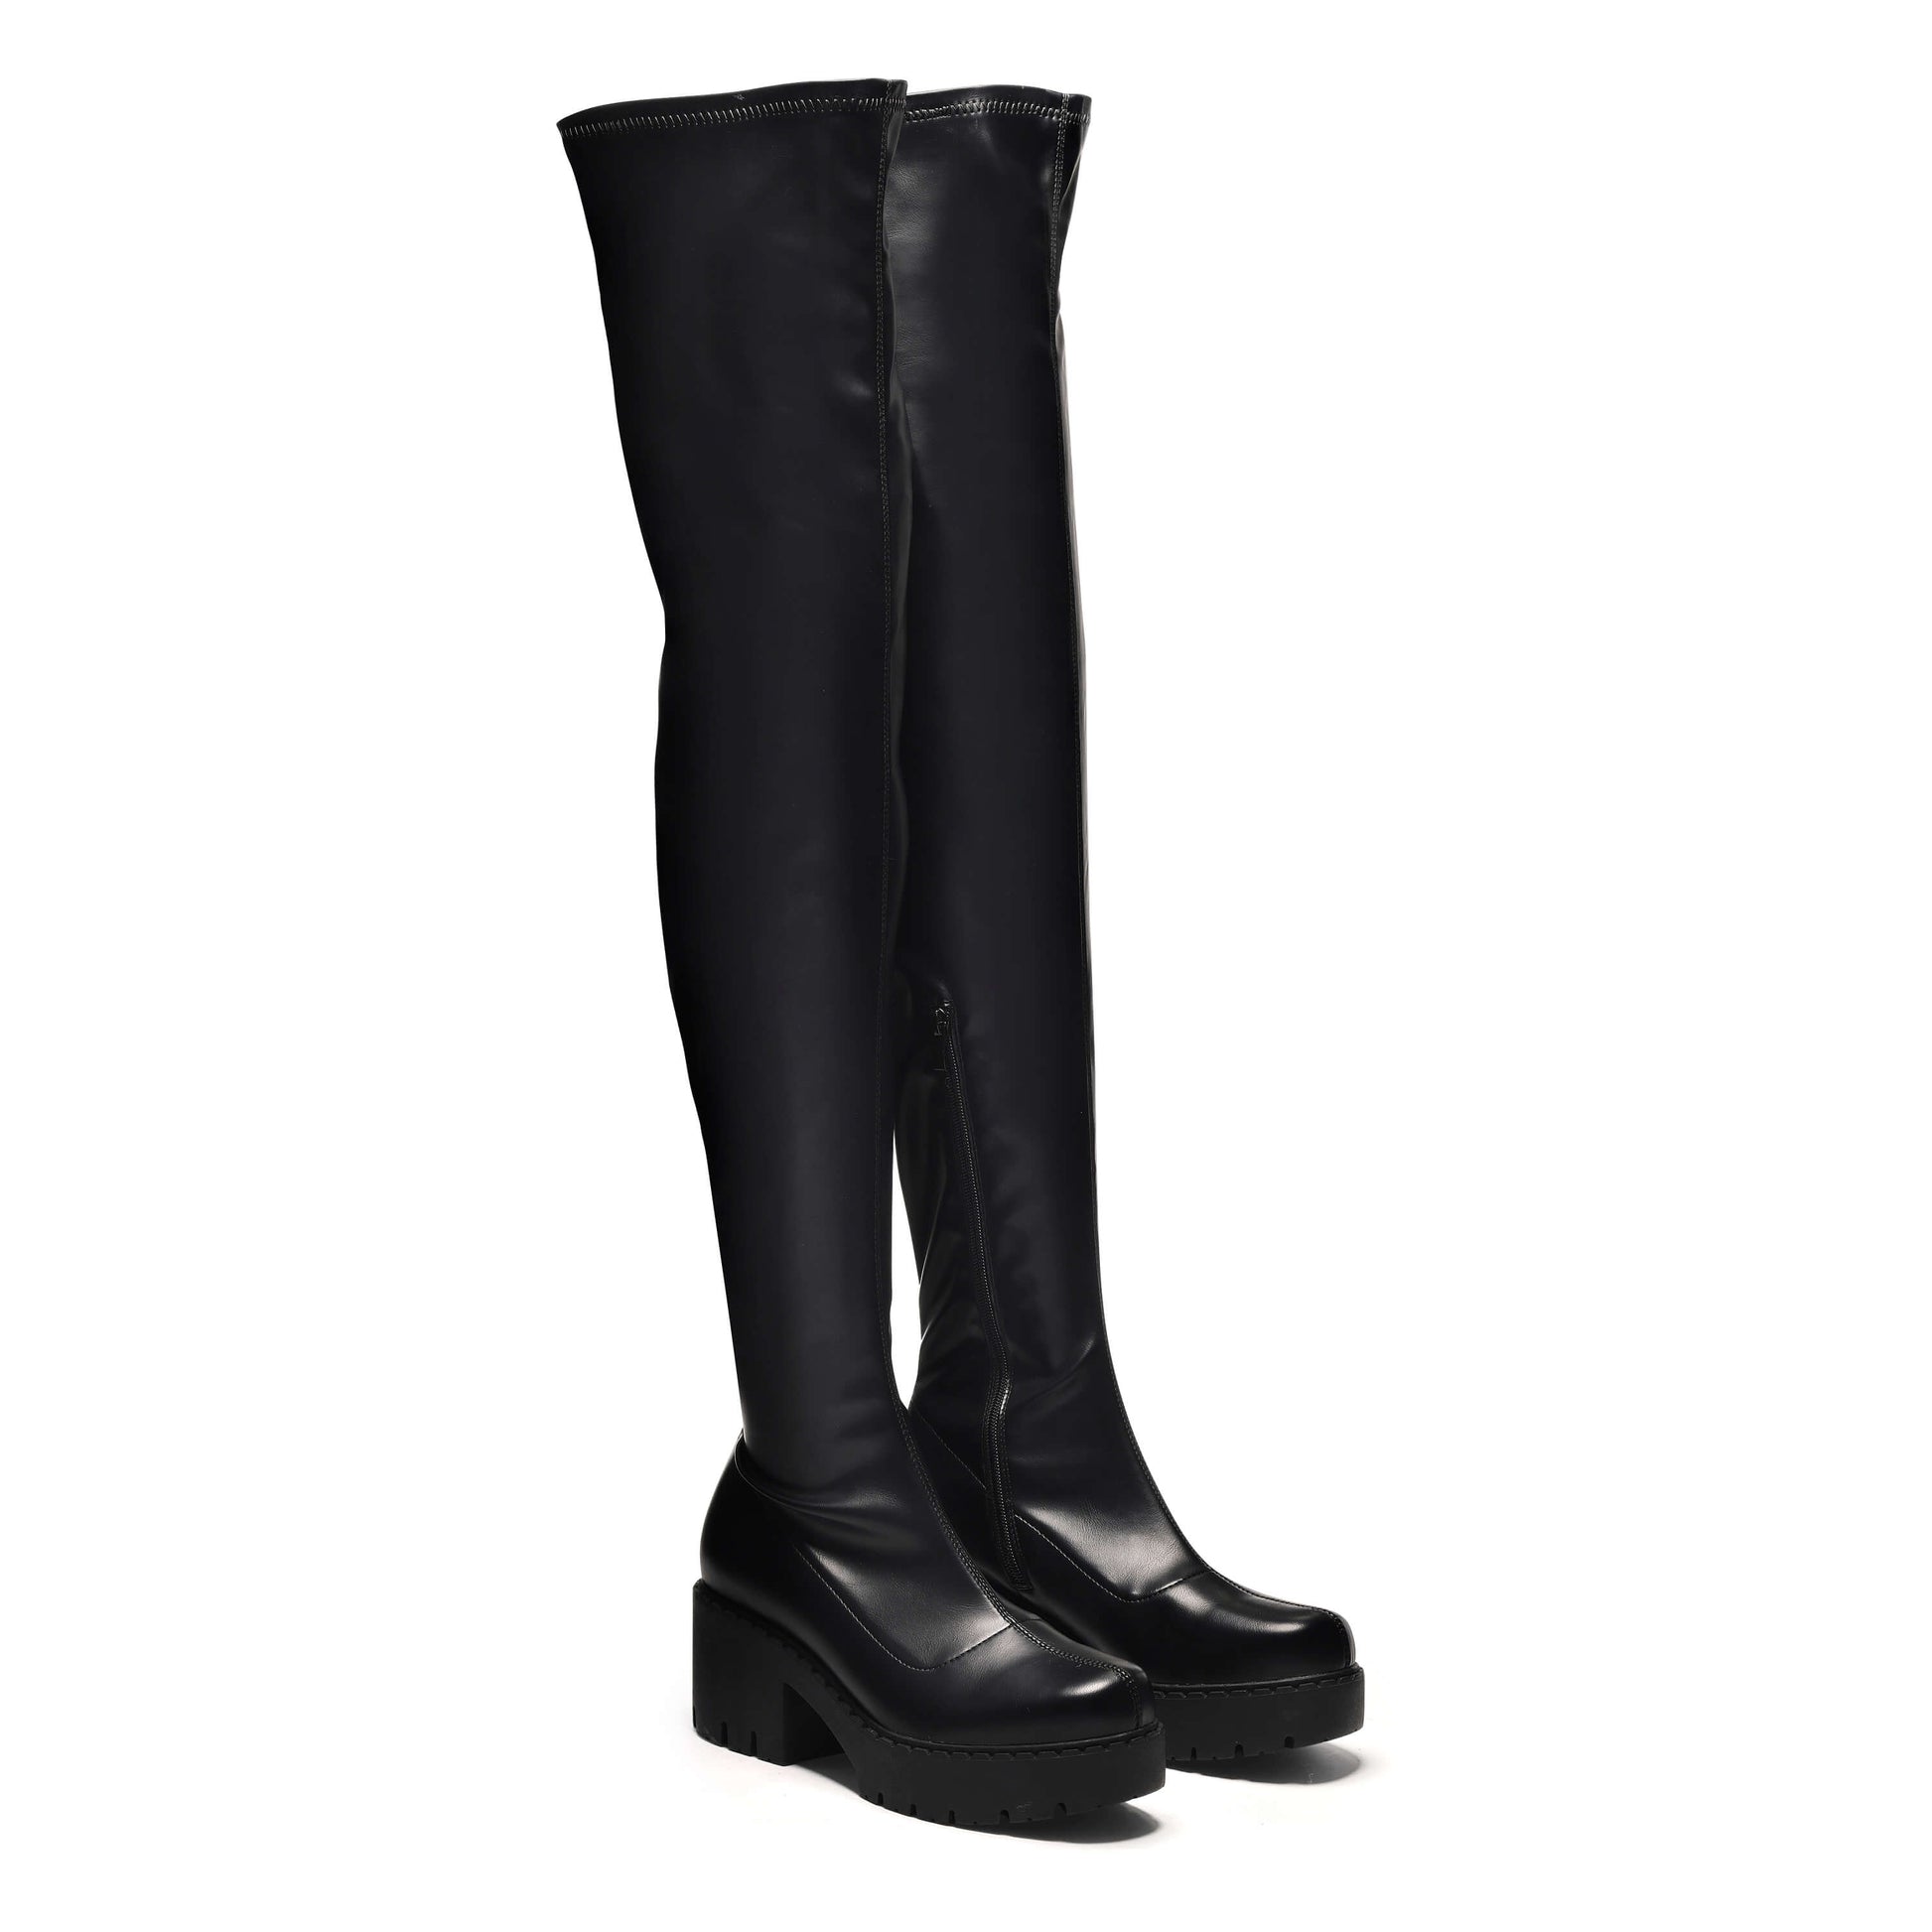 The Harmony Plus Size Thigh High Boots - Long Boots - KOI Footwear - Black - Three-Quarter View